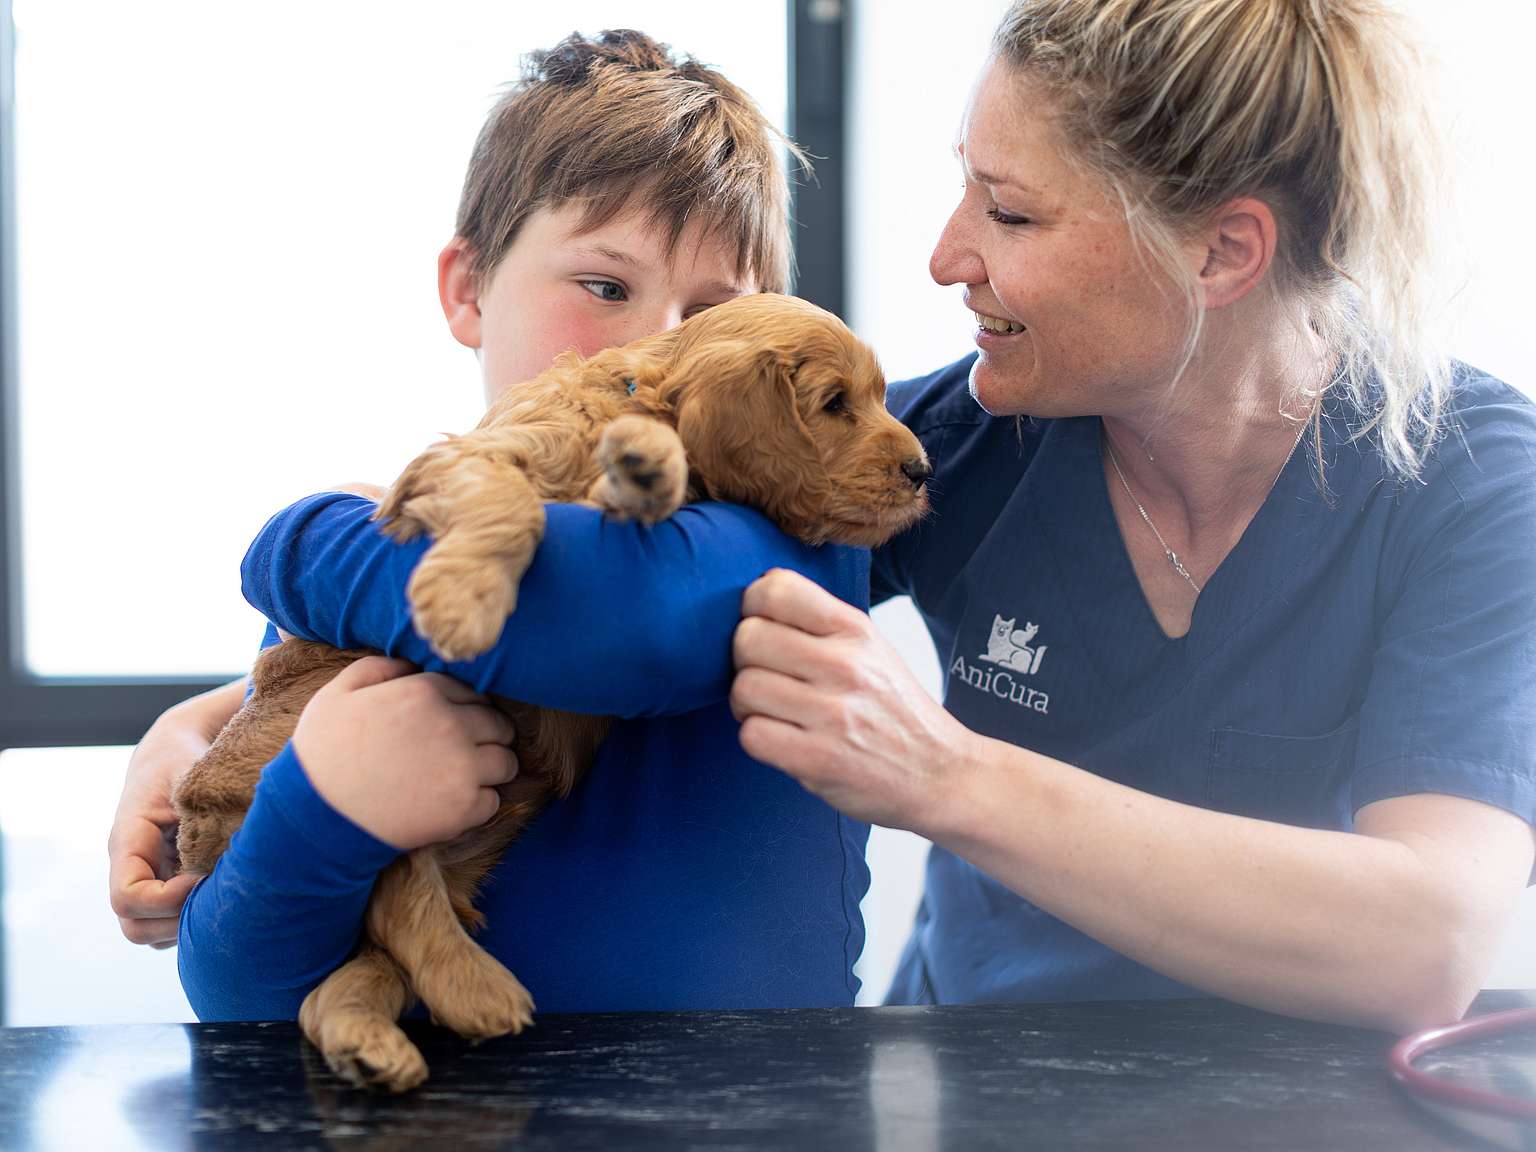 A boy is holding a puppy and a veterinatian stands beside them.